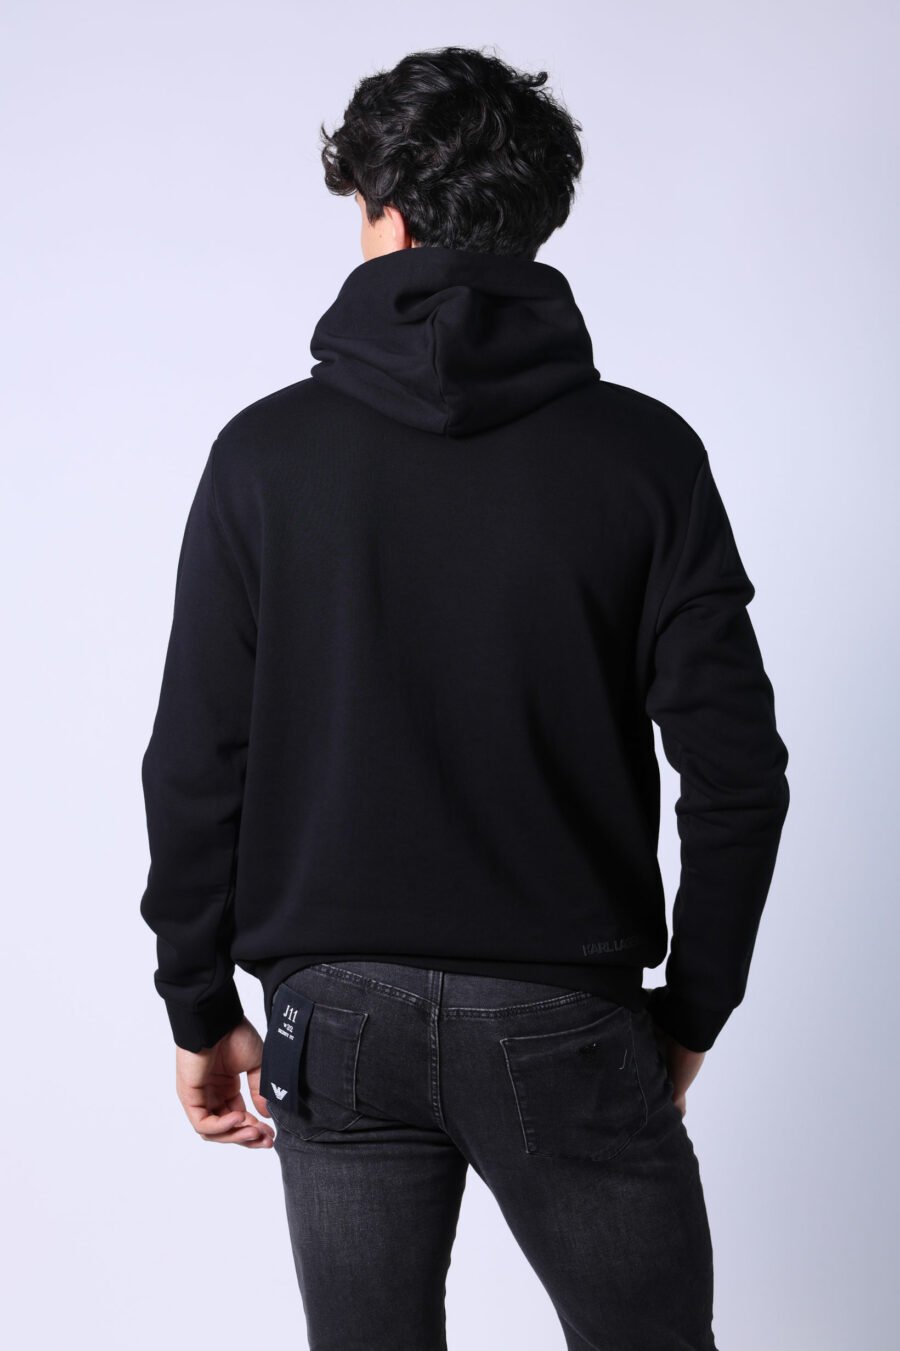 Black hooded sweatshirt with gold lettering "rue st guillaume" logo - Untitled Catalog 05730